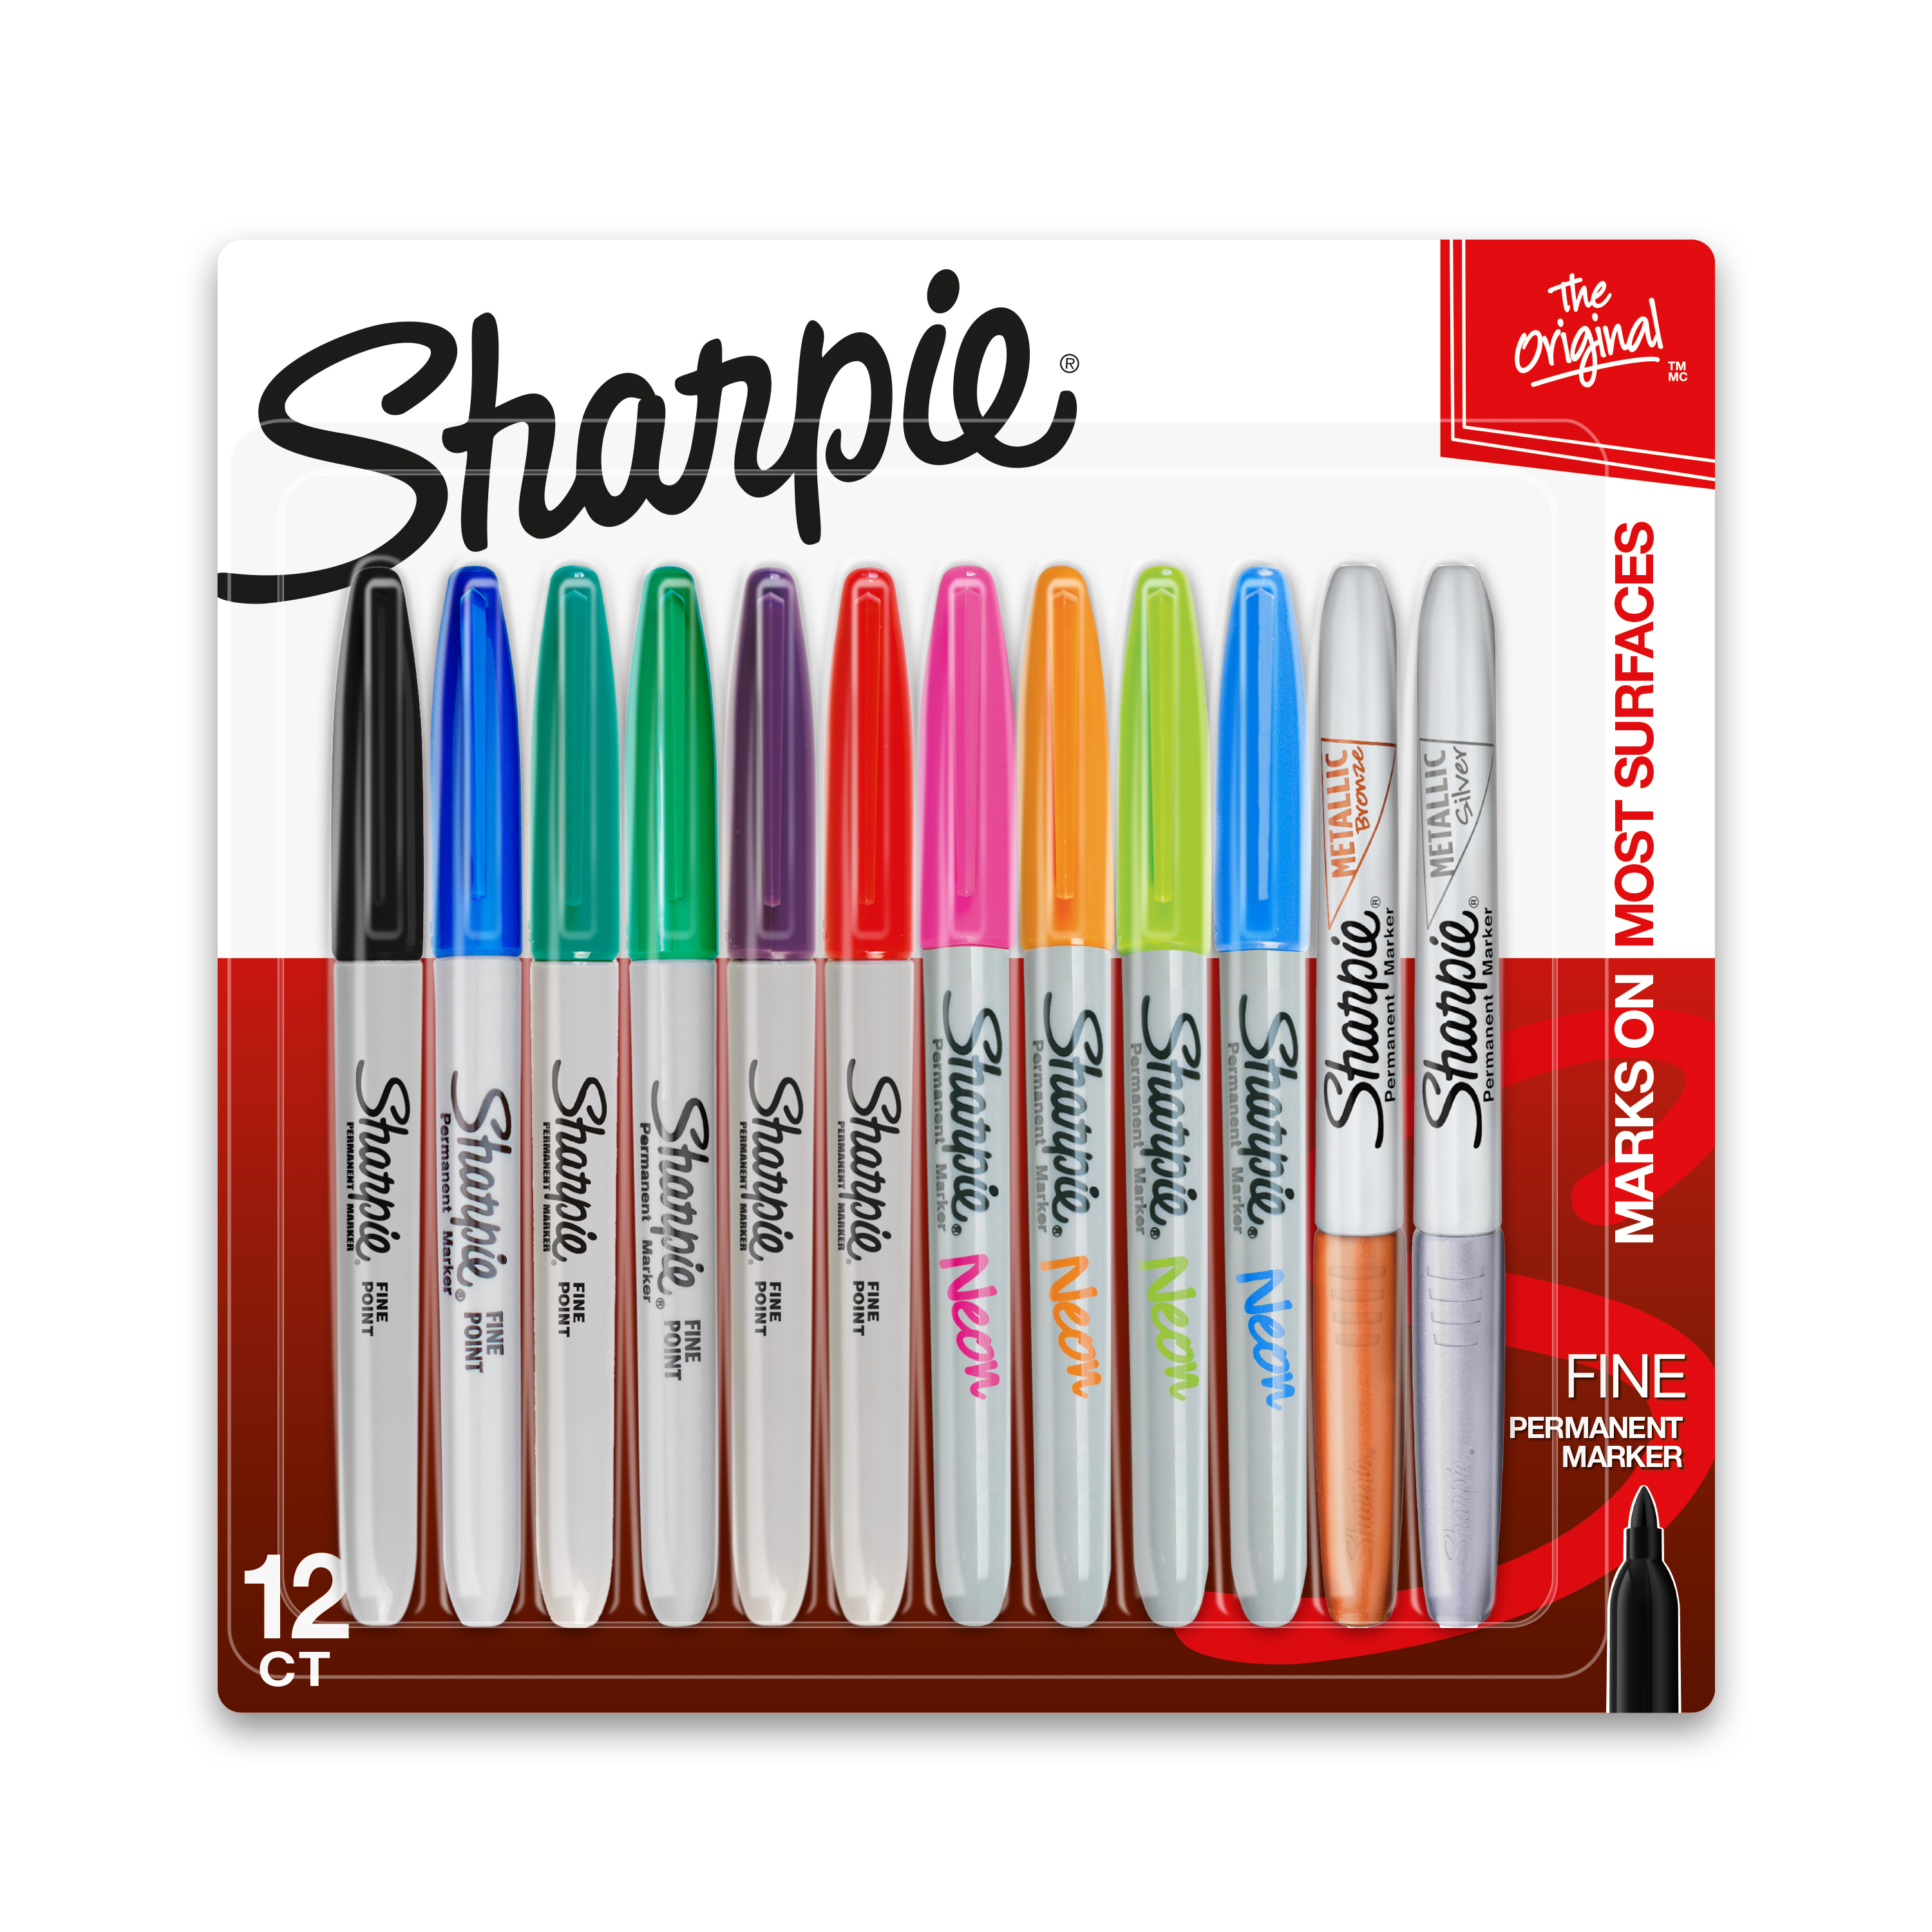 Sharpie Permanent Markers, Fine Point, Assorted Bold Colors, 12 Count - image 1 of 6